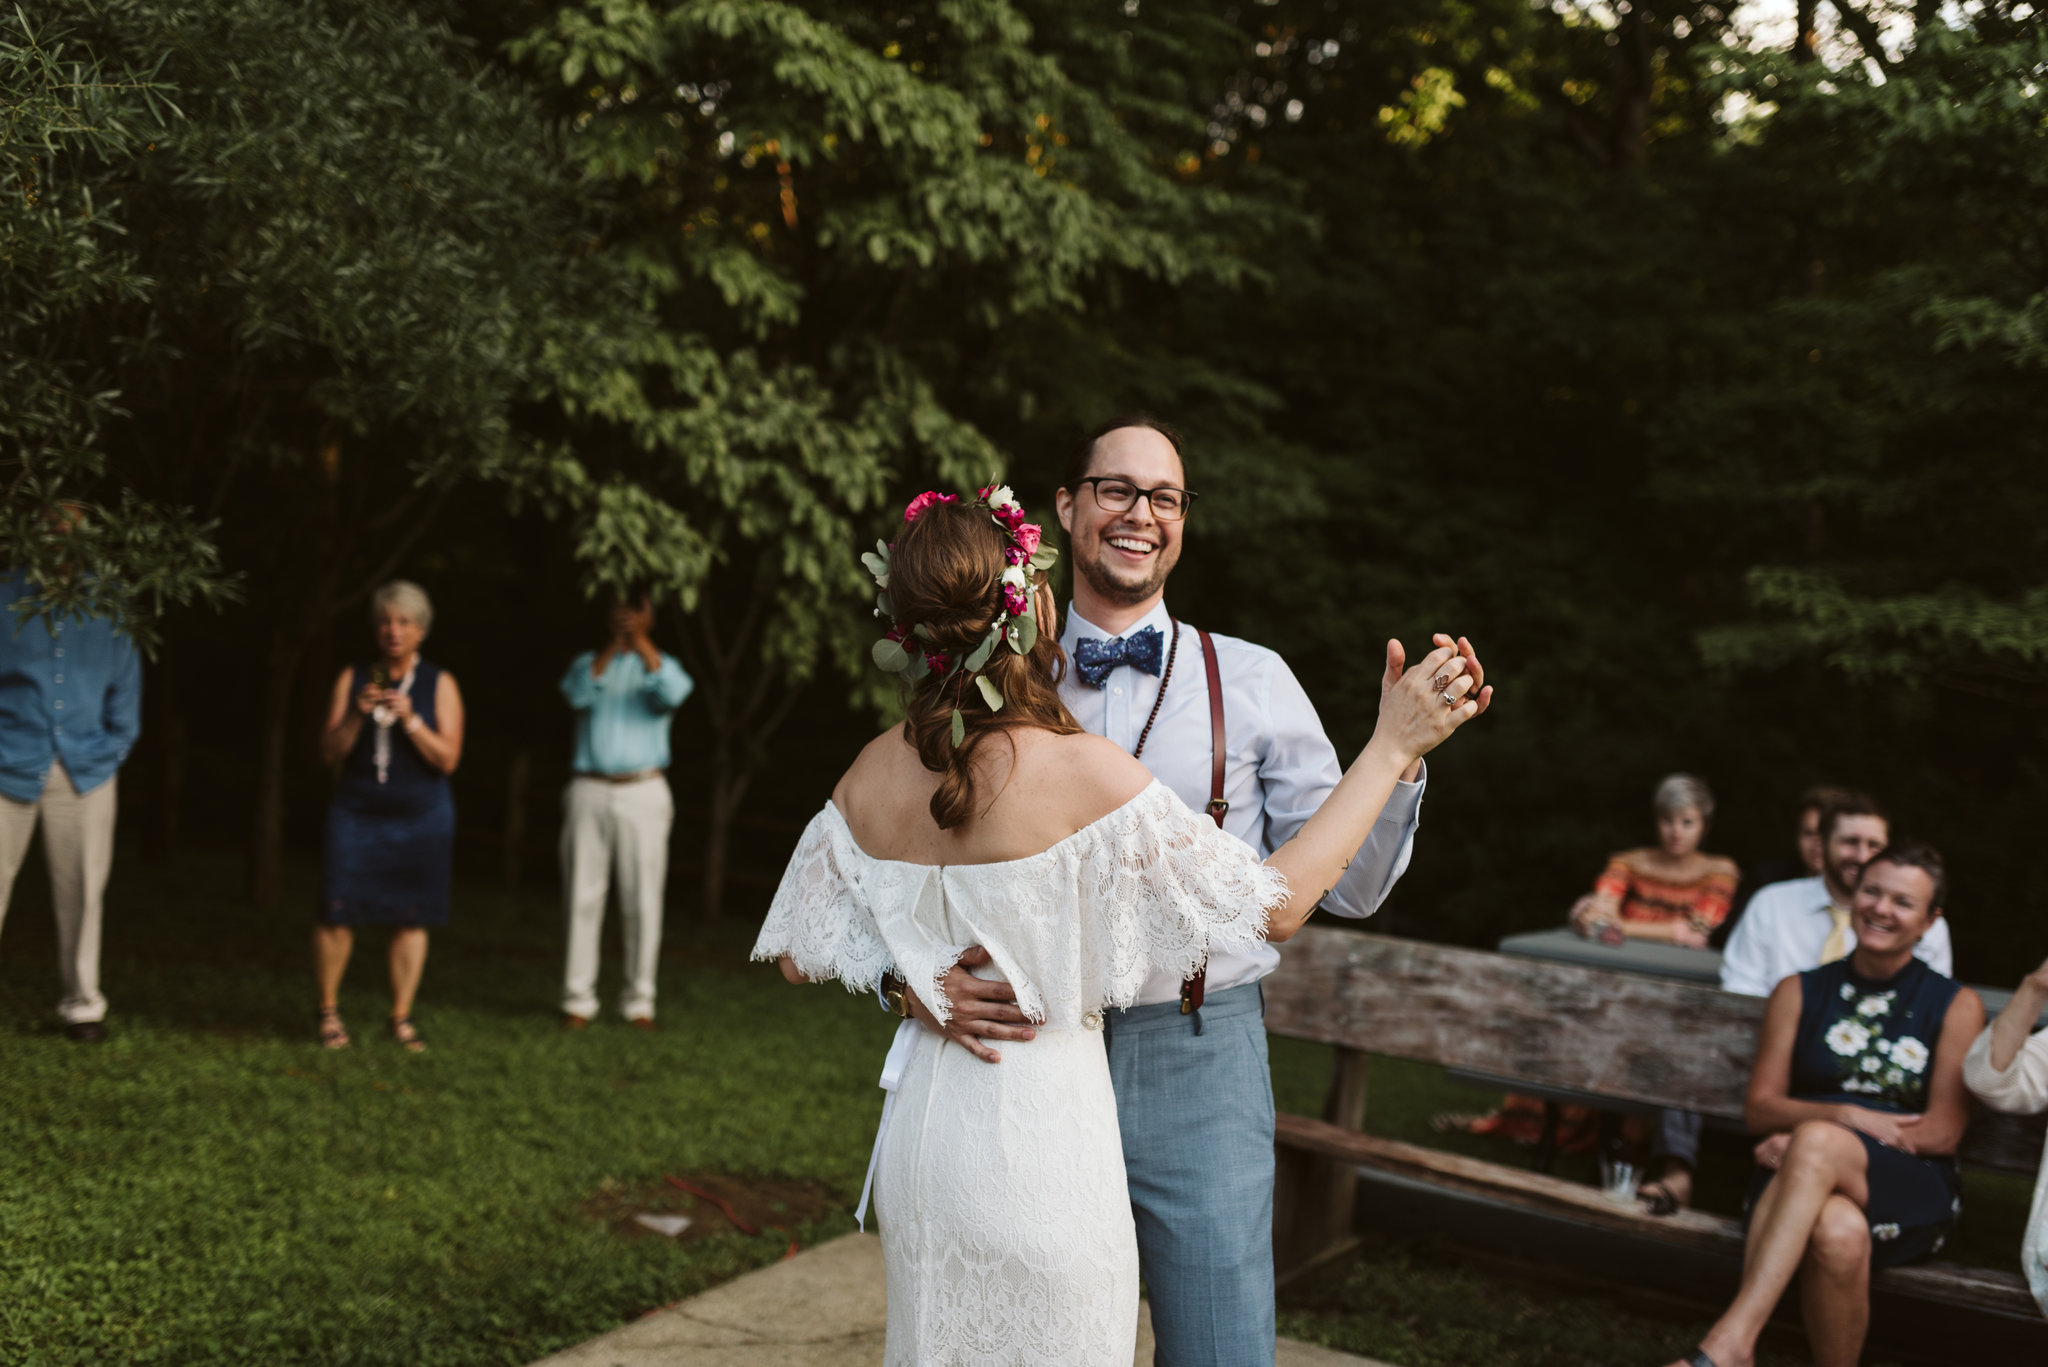  Annapolis, Quaker Wedding, Maryland Wedding Photographer, Intimate, Small Wedding, Vintage, DIY, First Dance, Bride and Groom Dancing Together 